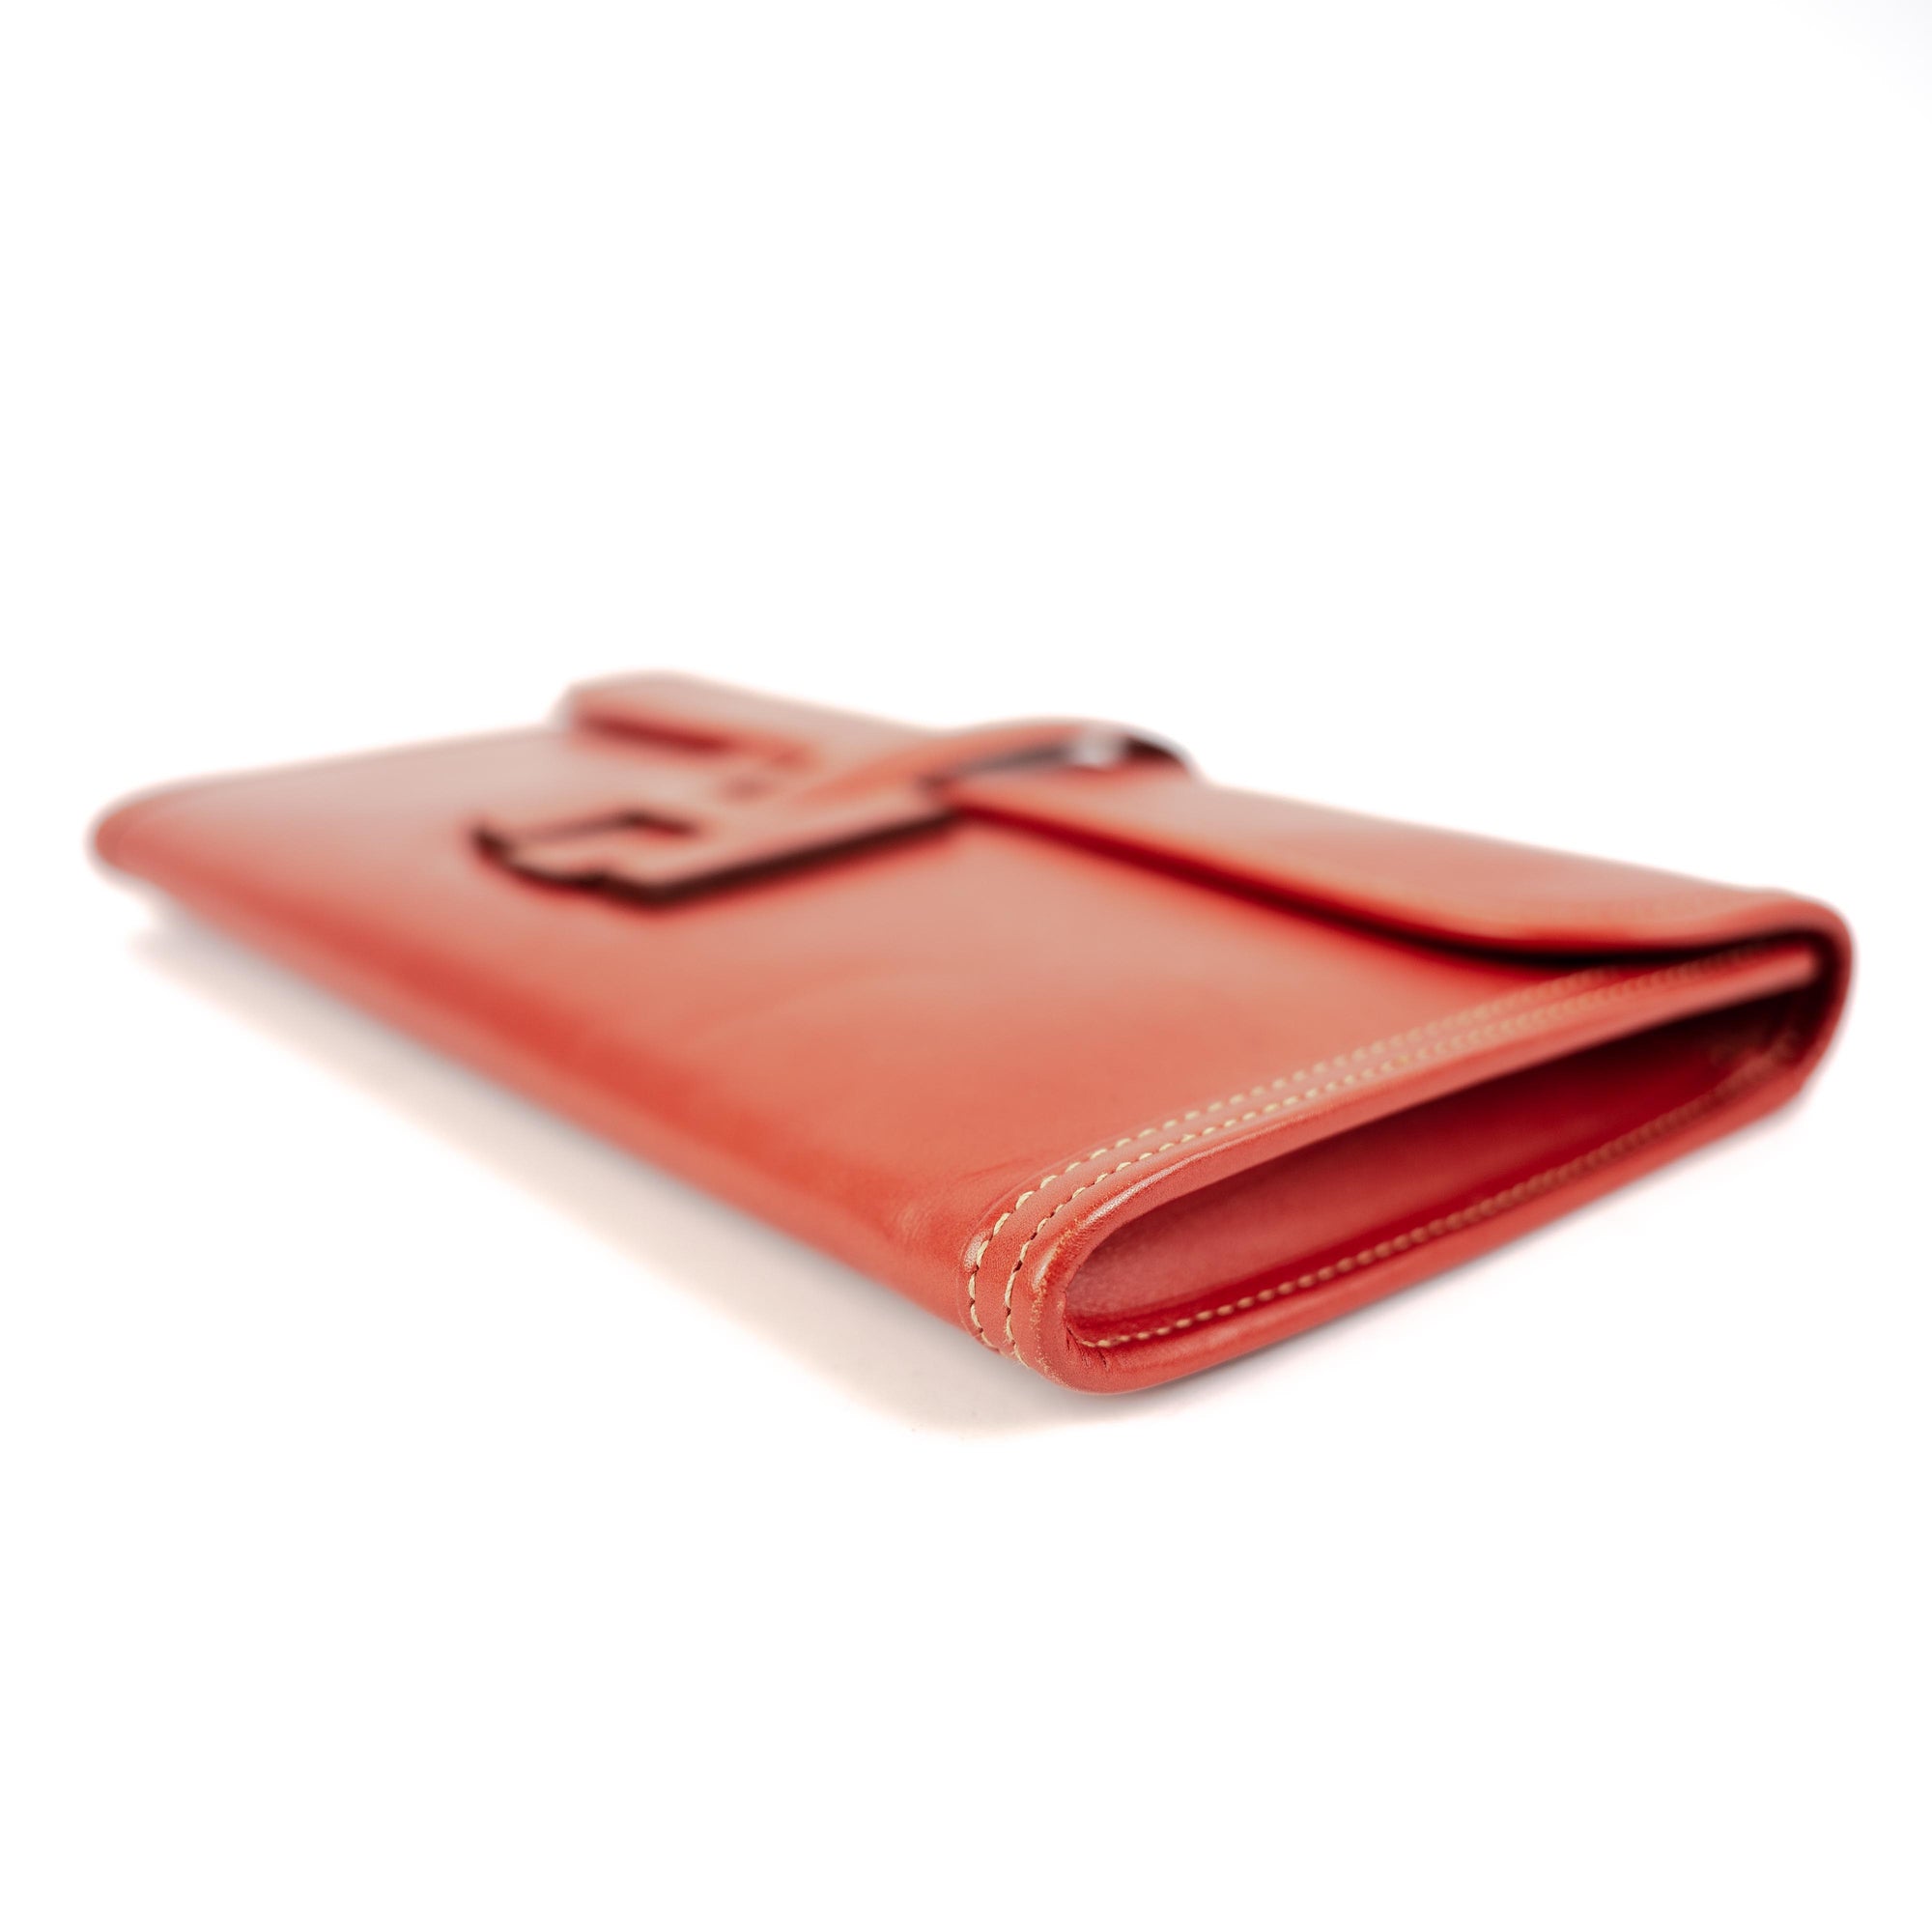 Hermès Jige Red Leather Clutch For Sale at 1stDibs